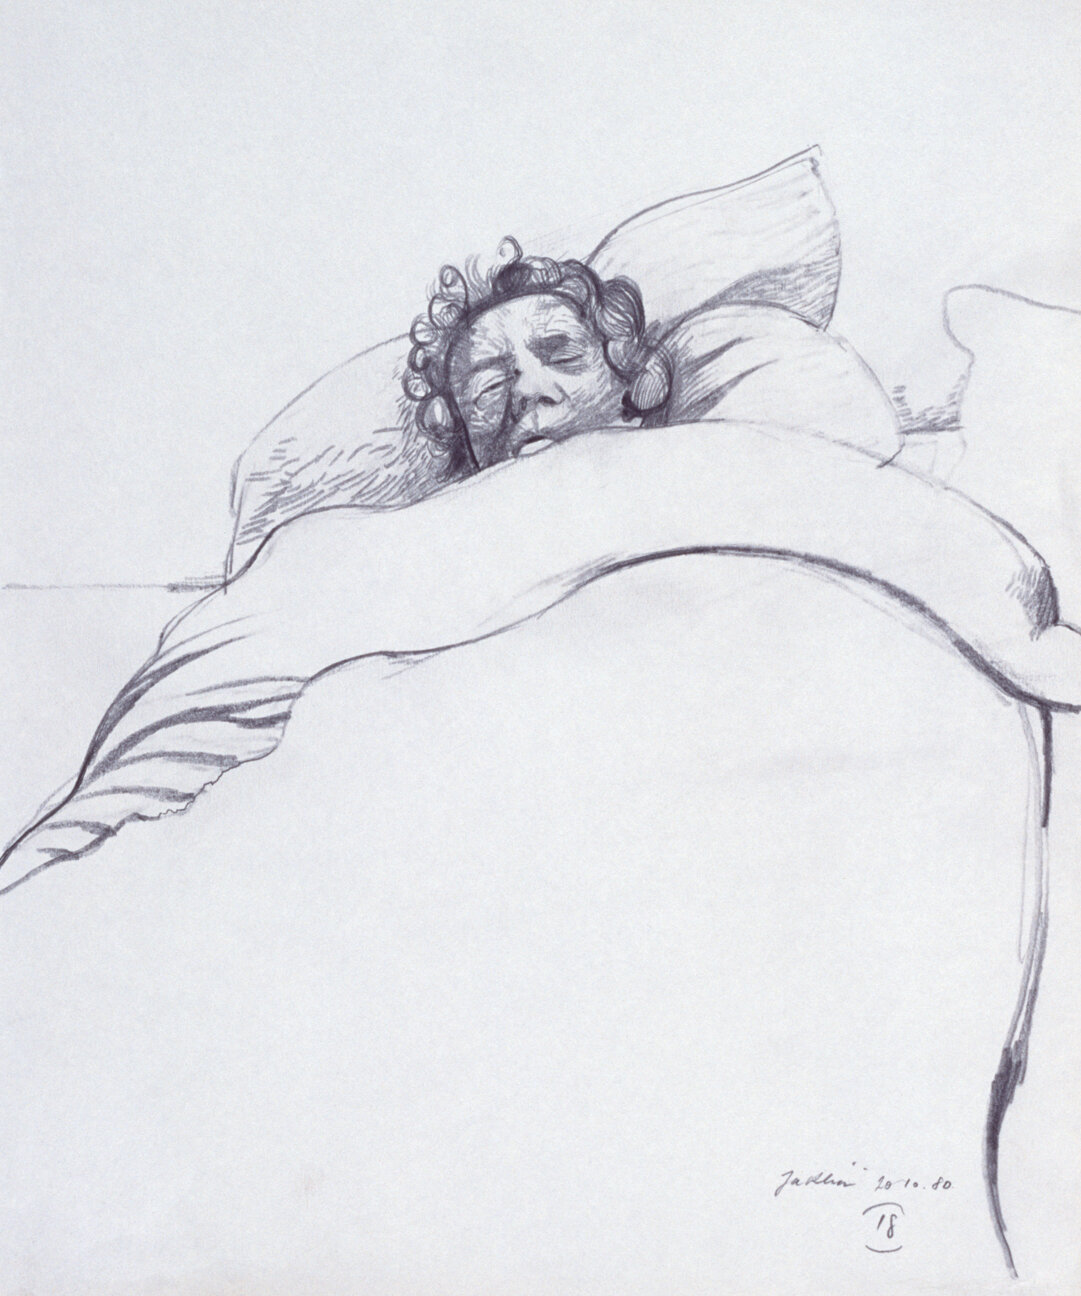 Woman in Bed (Alice Jacklin) h1-20a (1980)